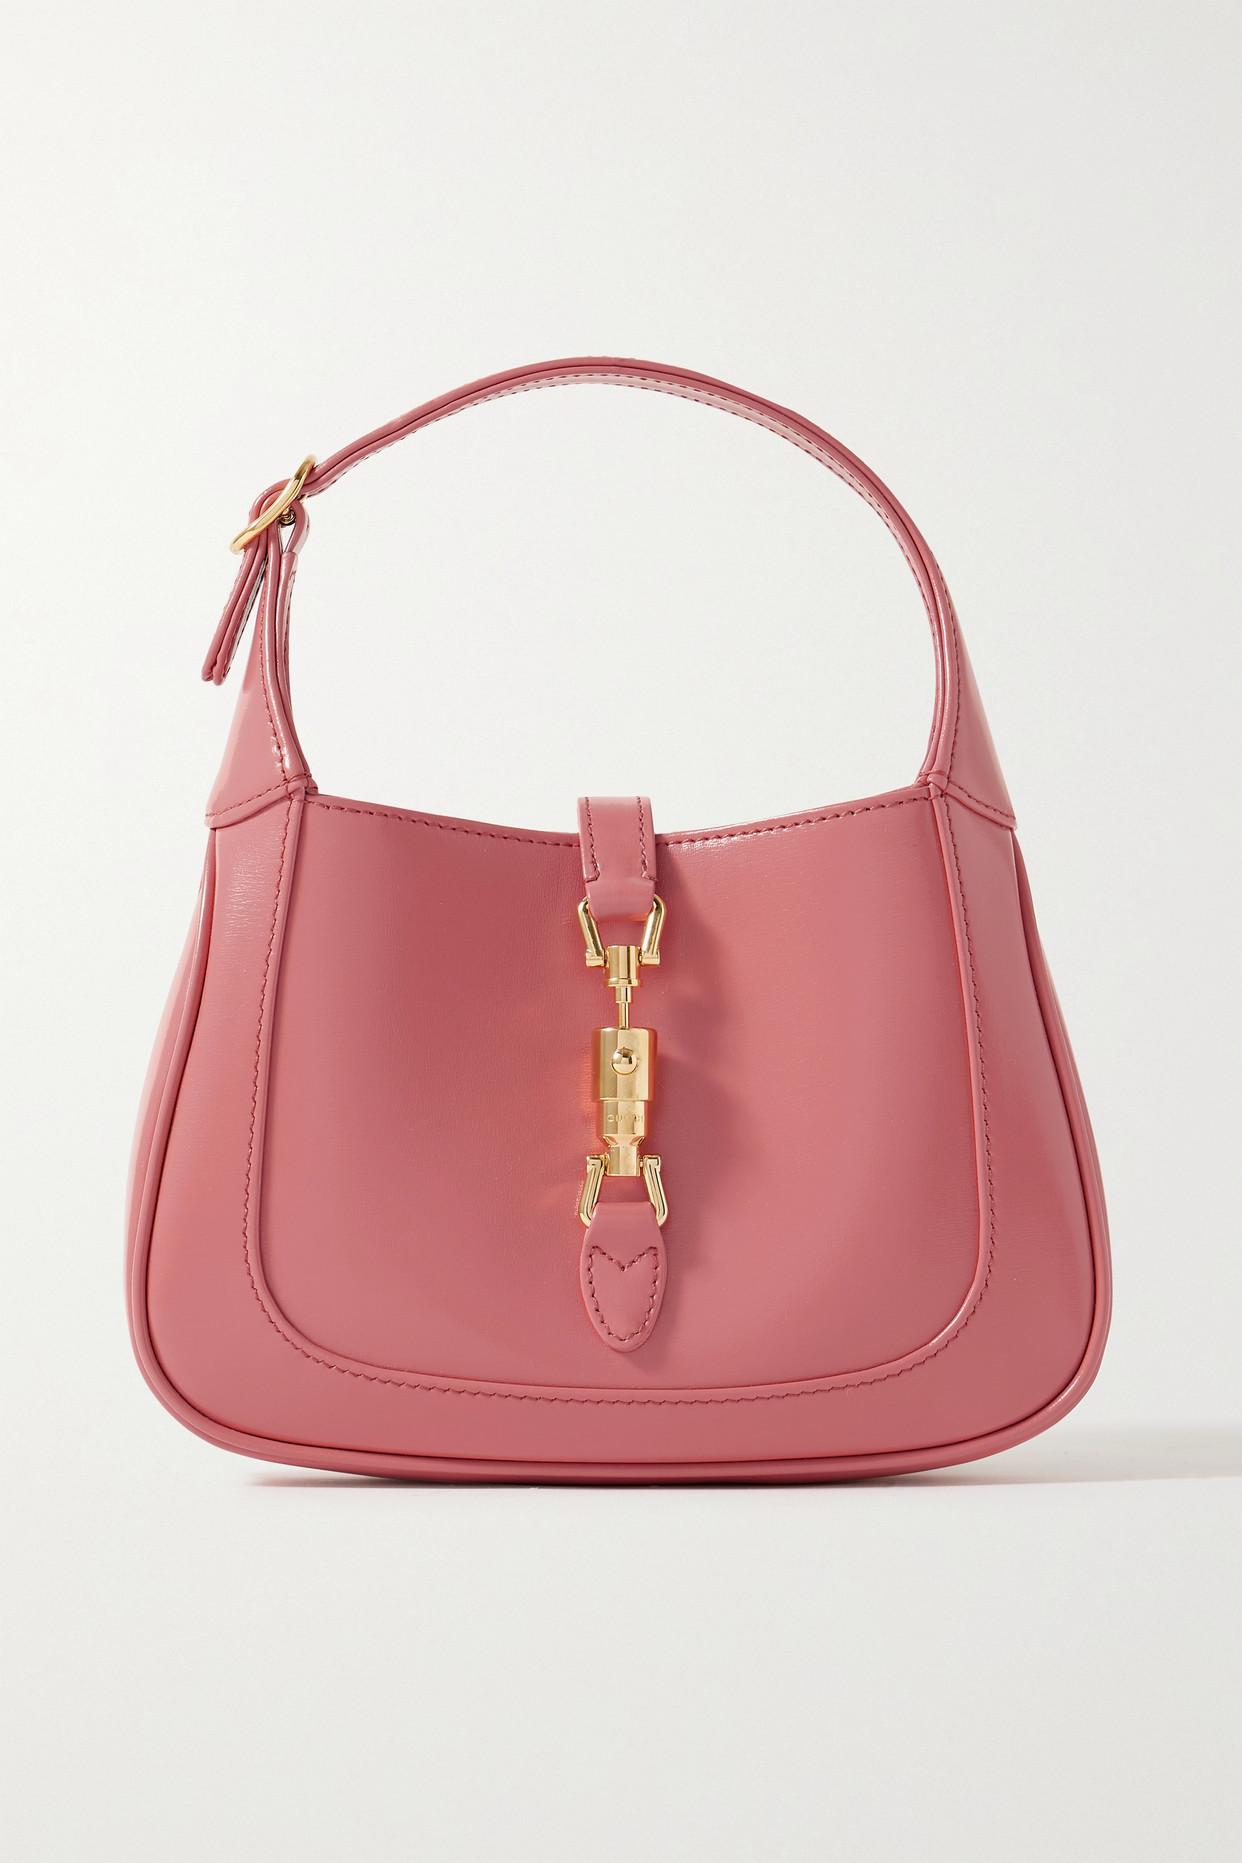 Gucci Jackie 1961 Mini Leather Shoulder Bag in Pink | Lyst